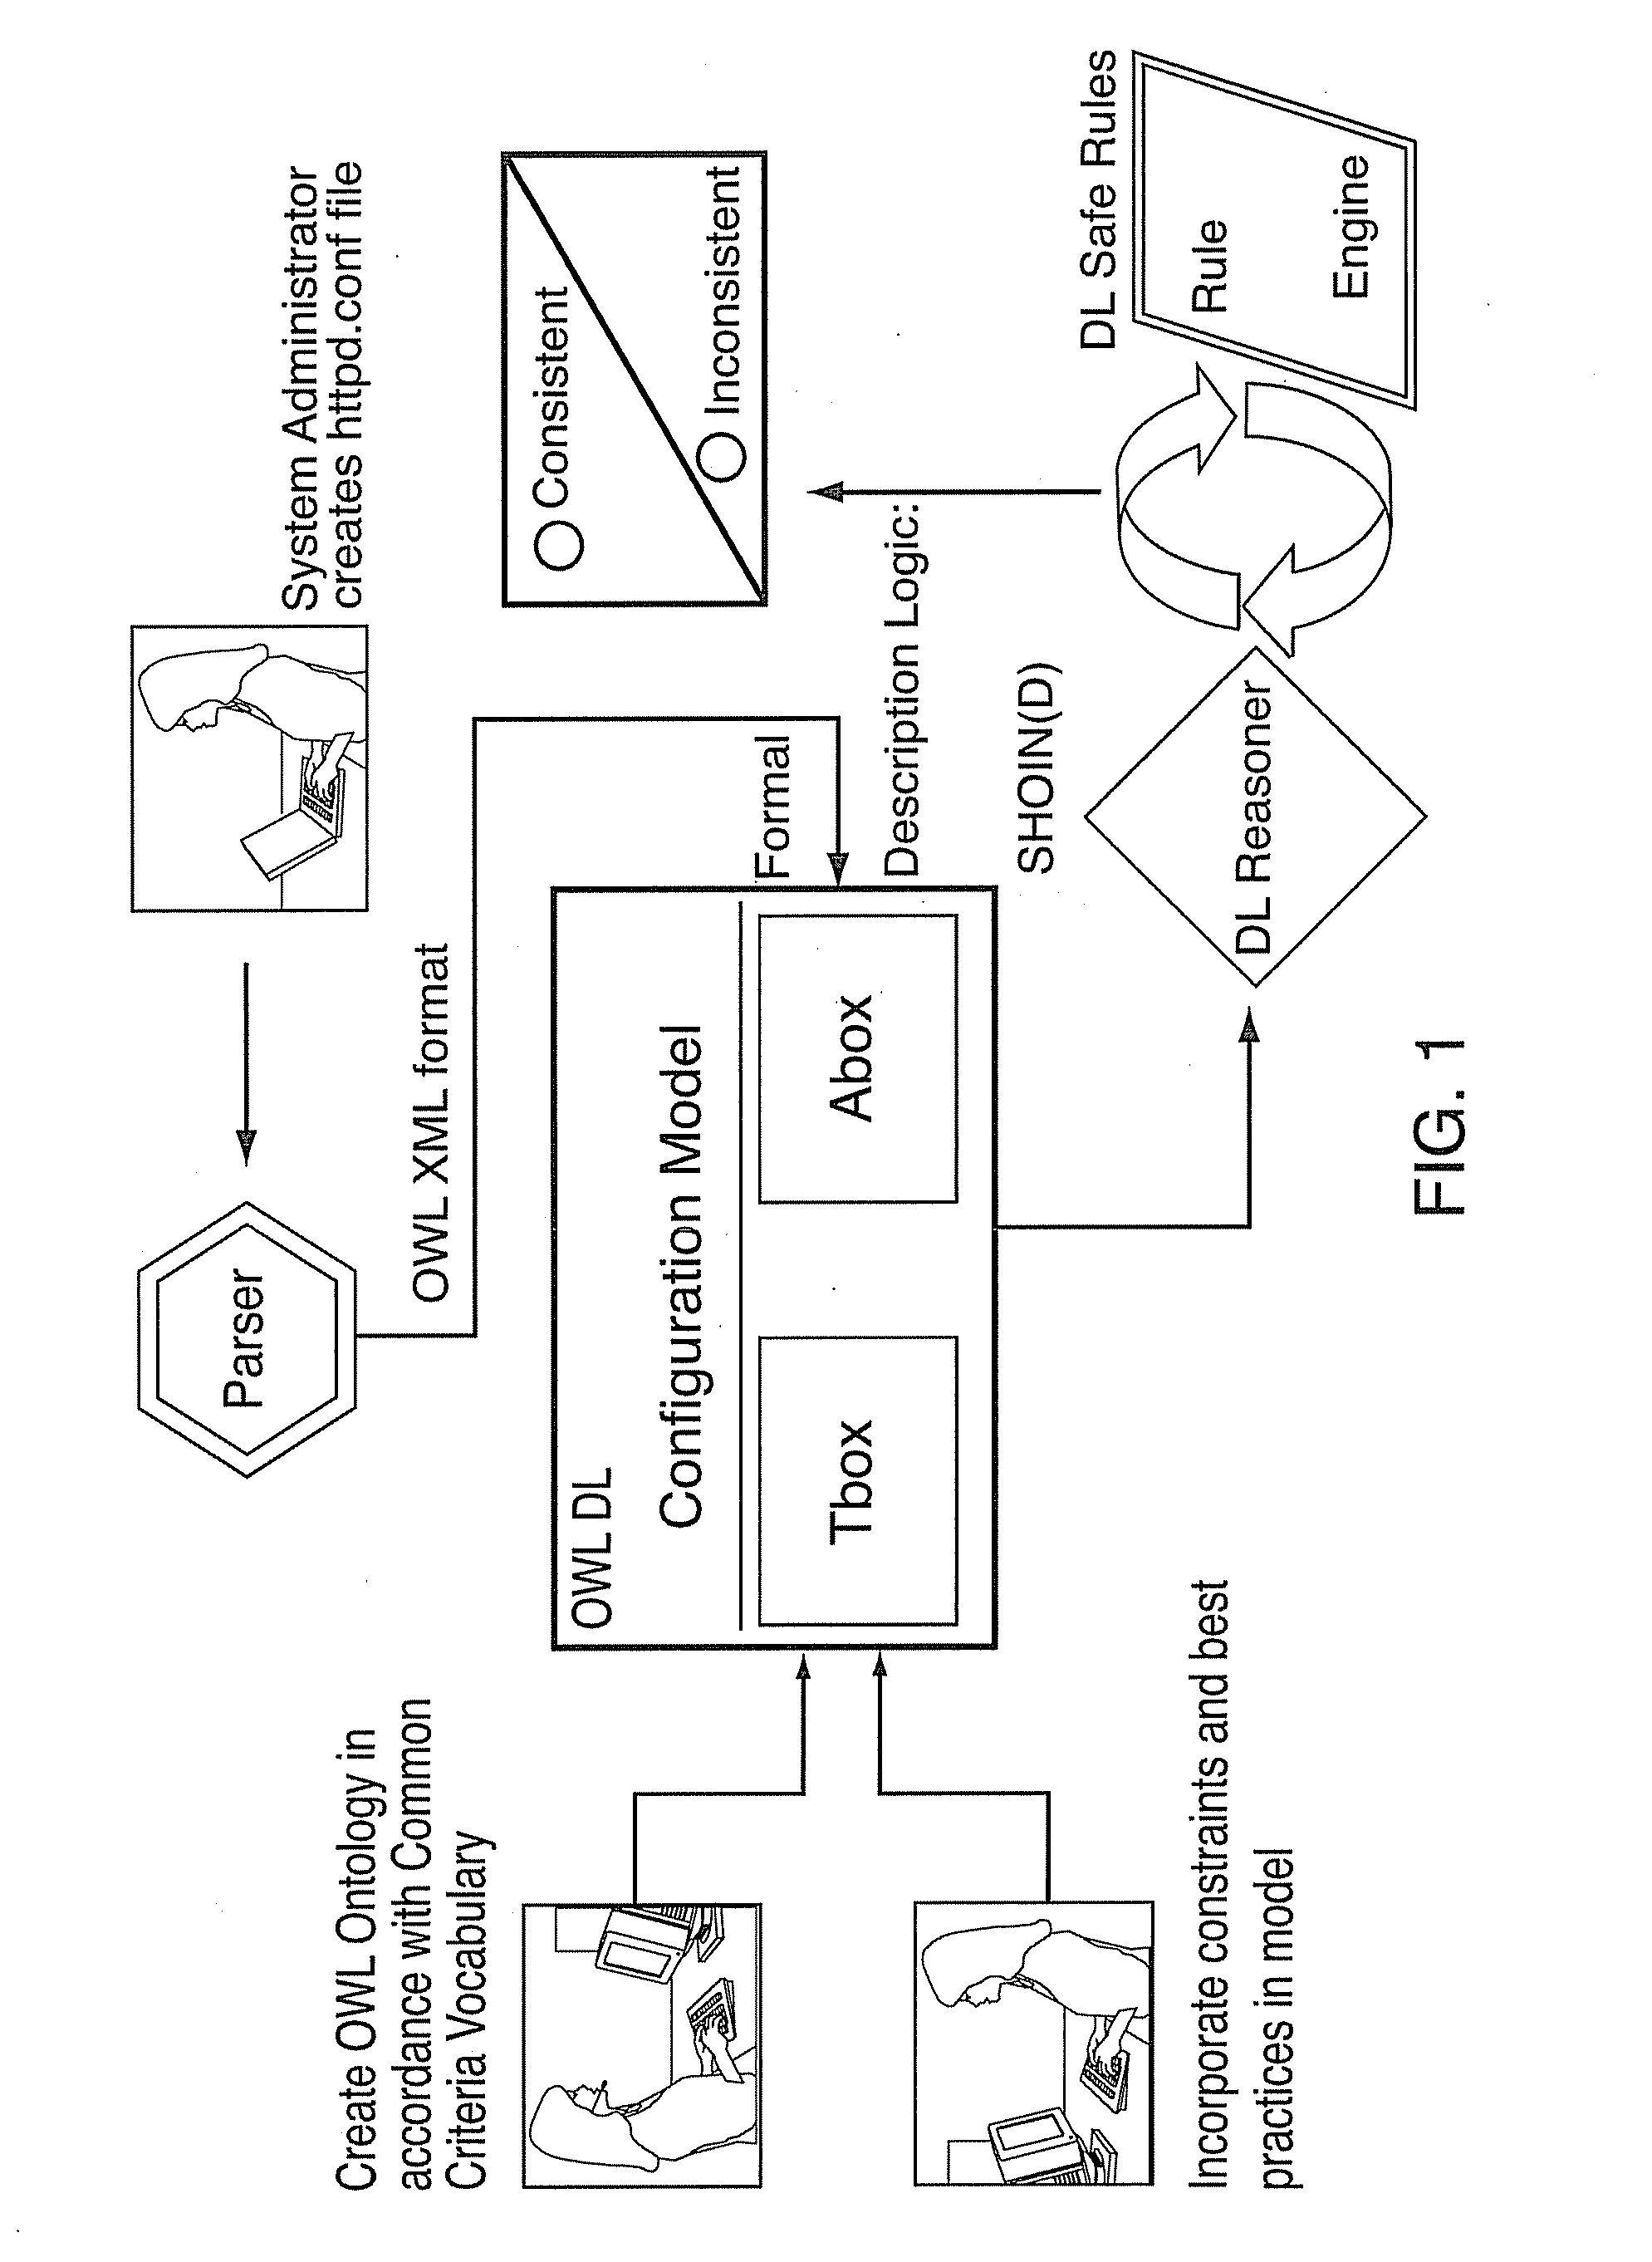 Method and apparatus for configuration modelling and consistency checking of web applications